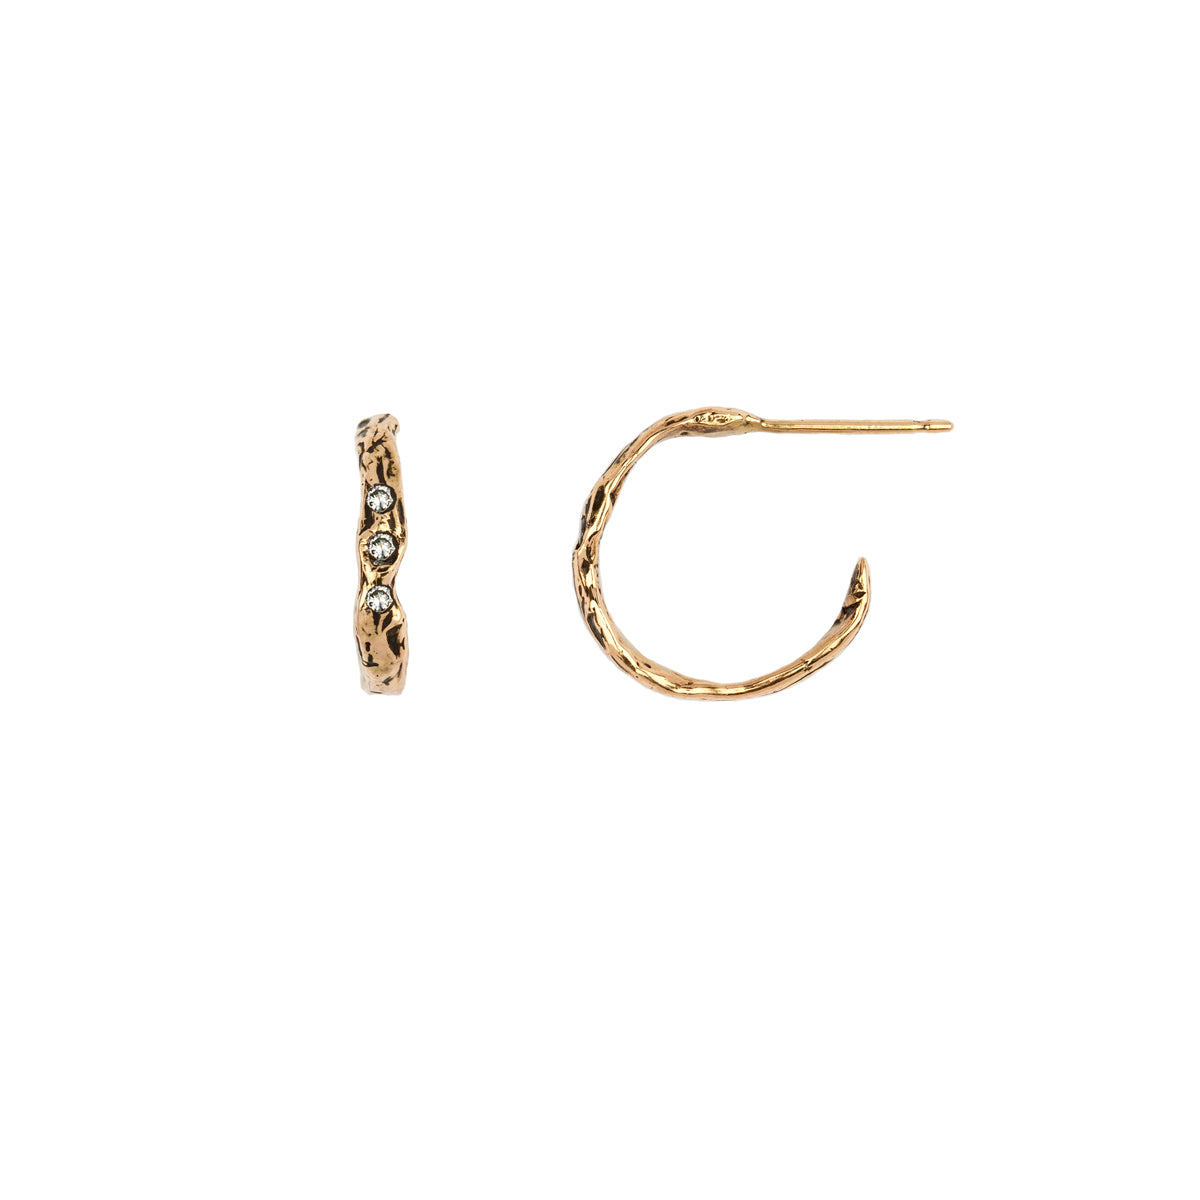 A set of extra small 14k gold hoop earrings with a textured design and three diamonds.